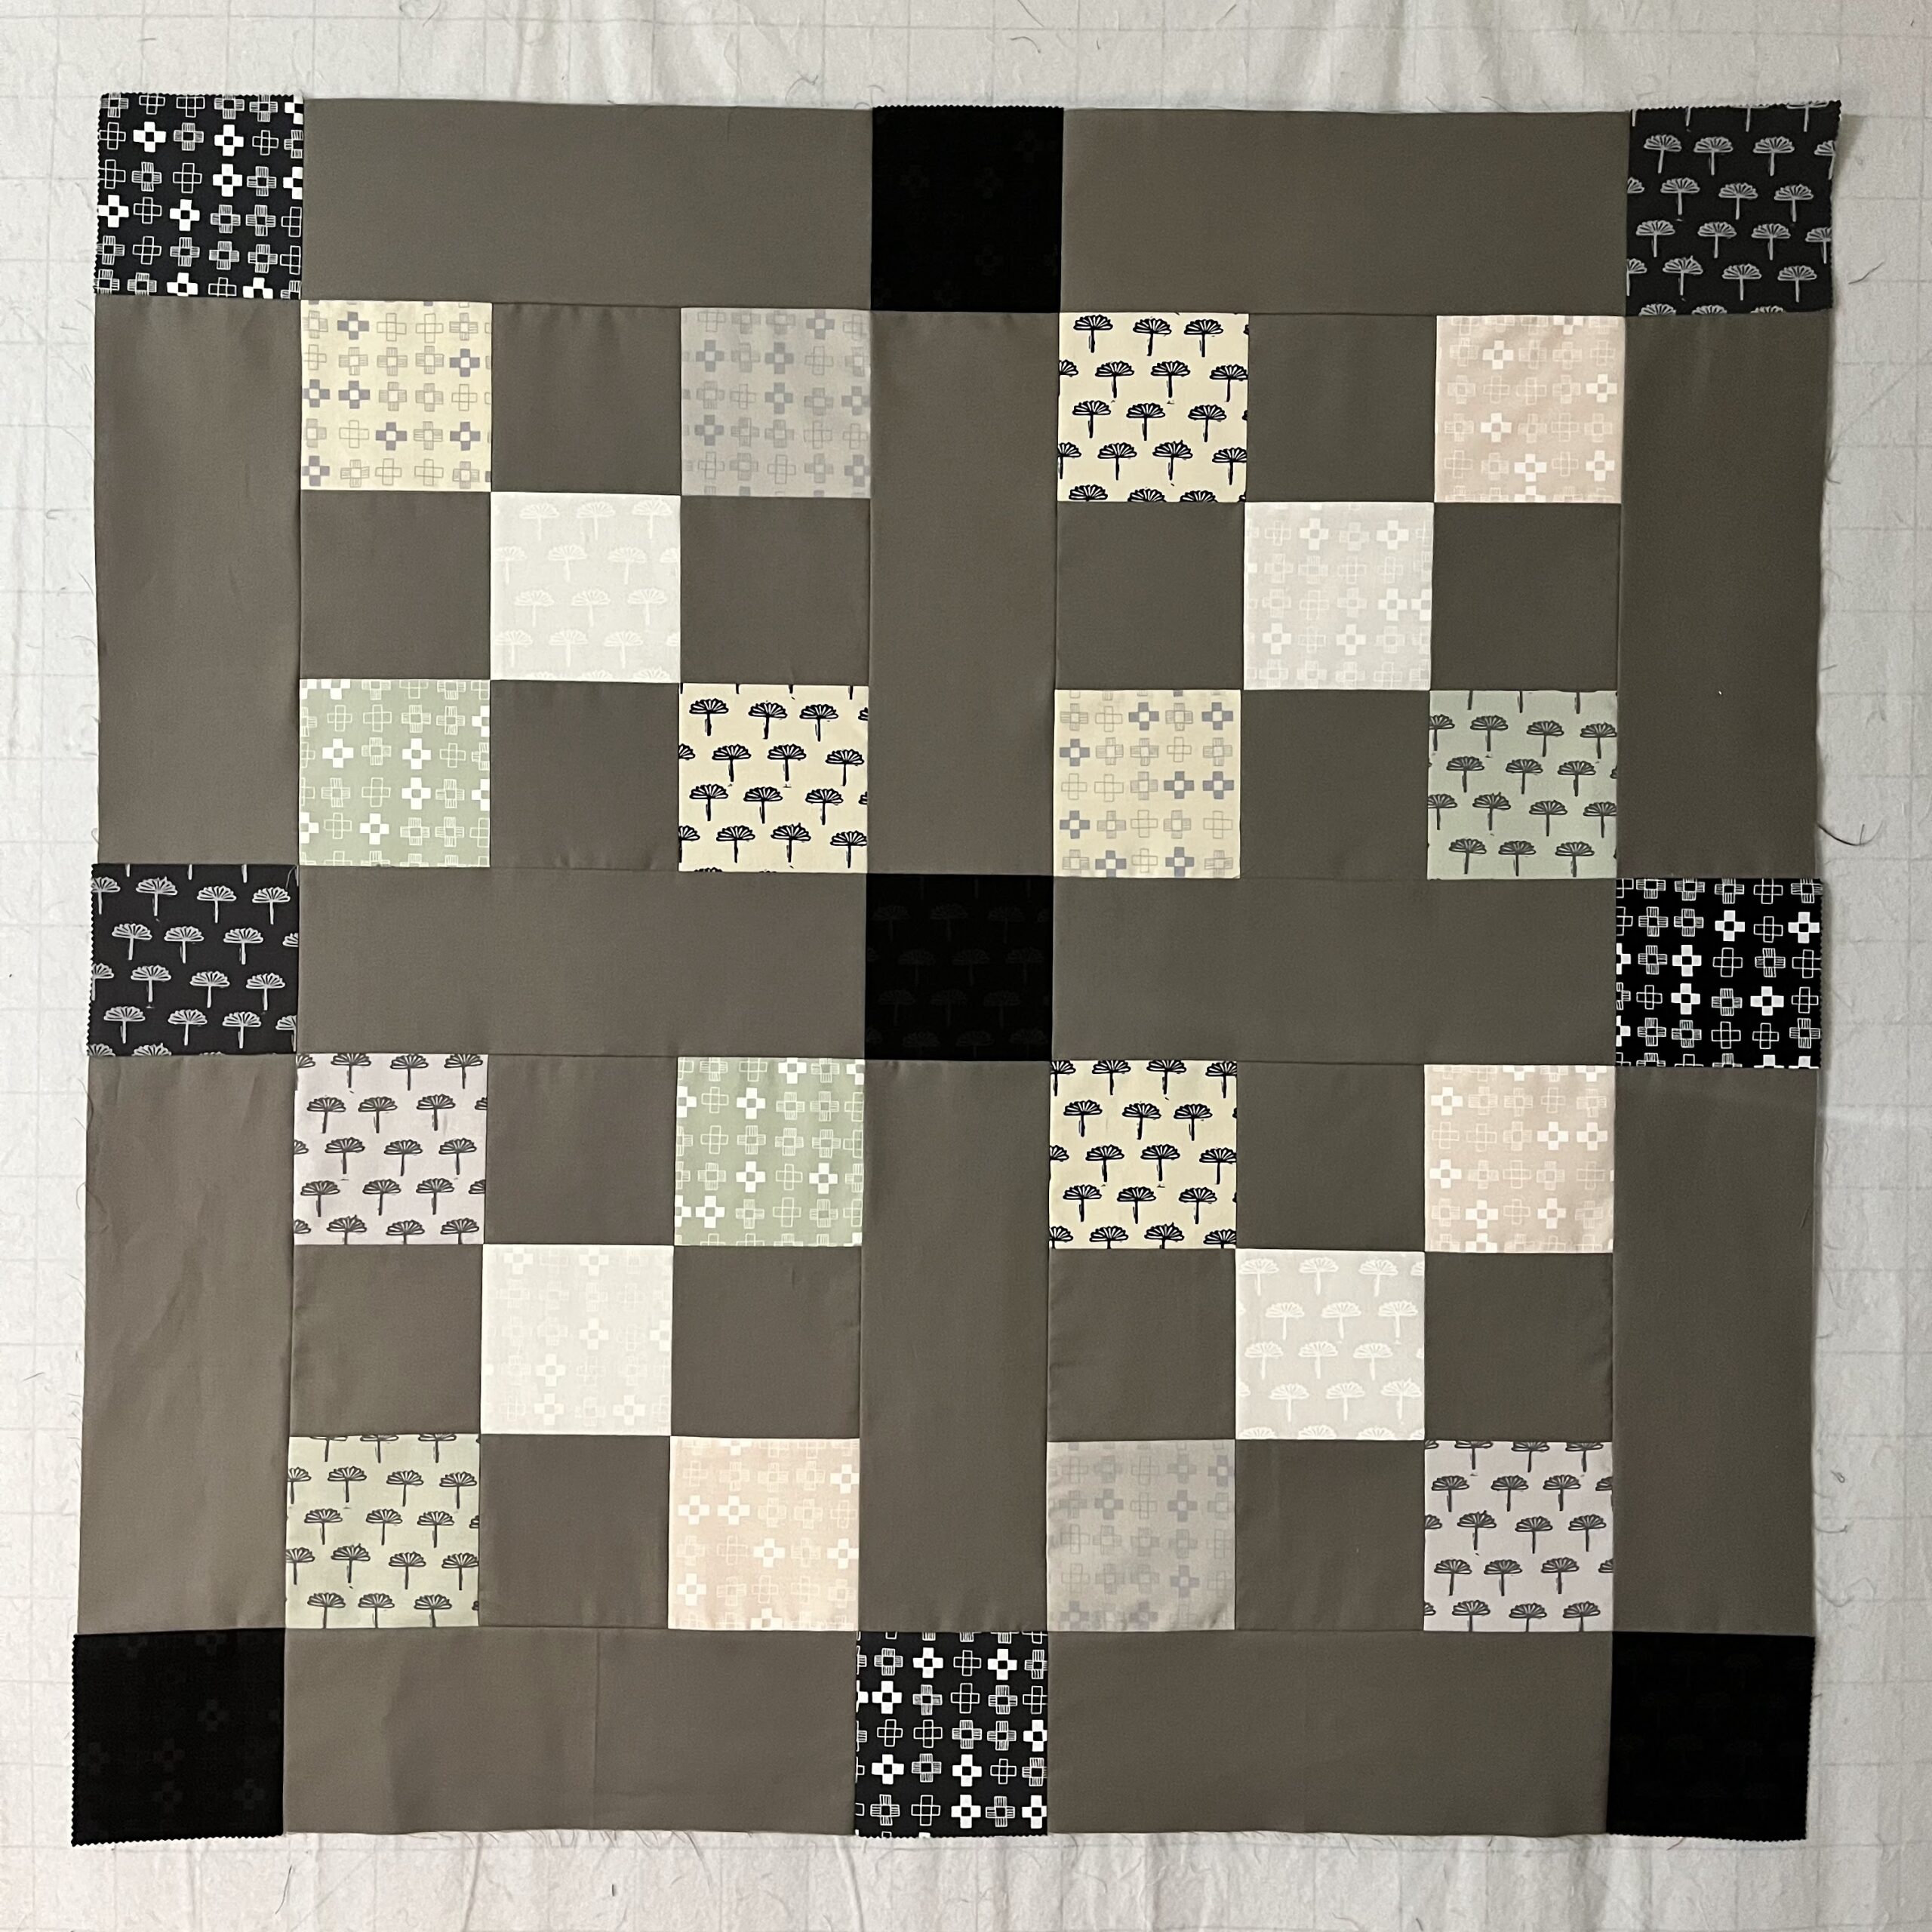 Quilt top sewn together